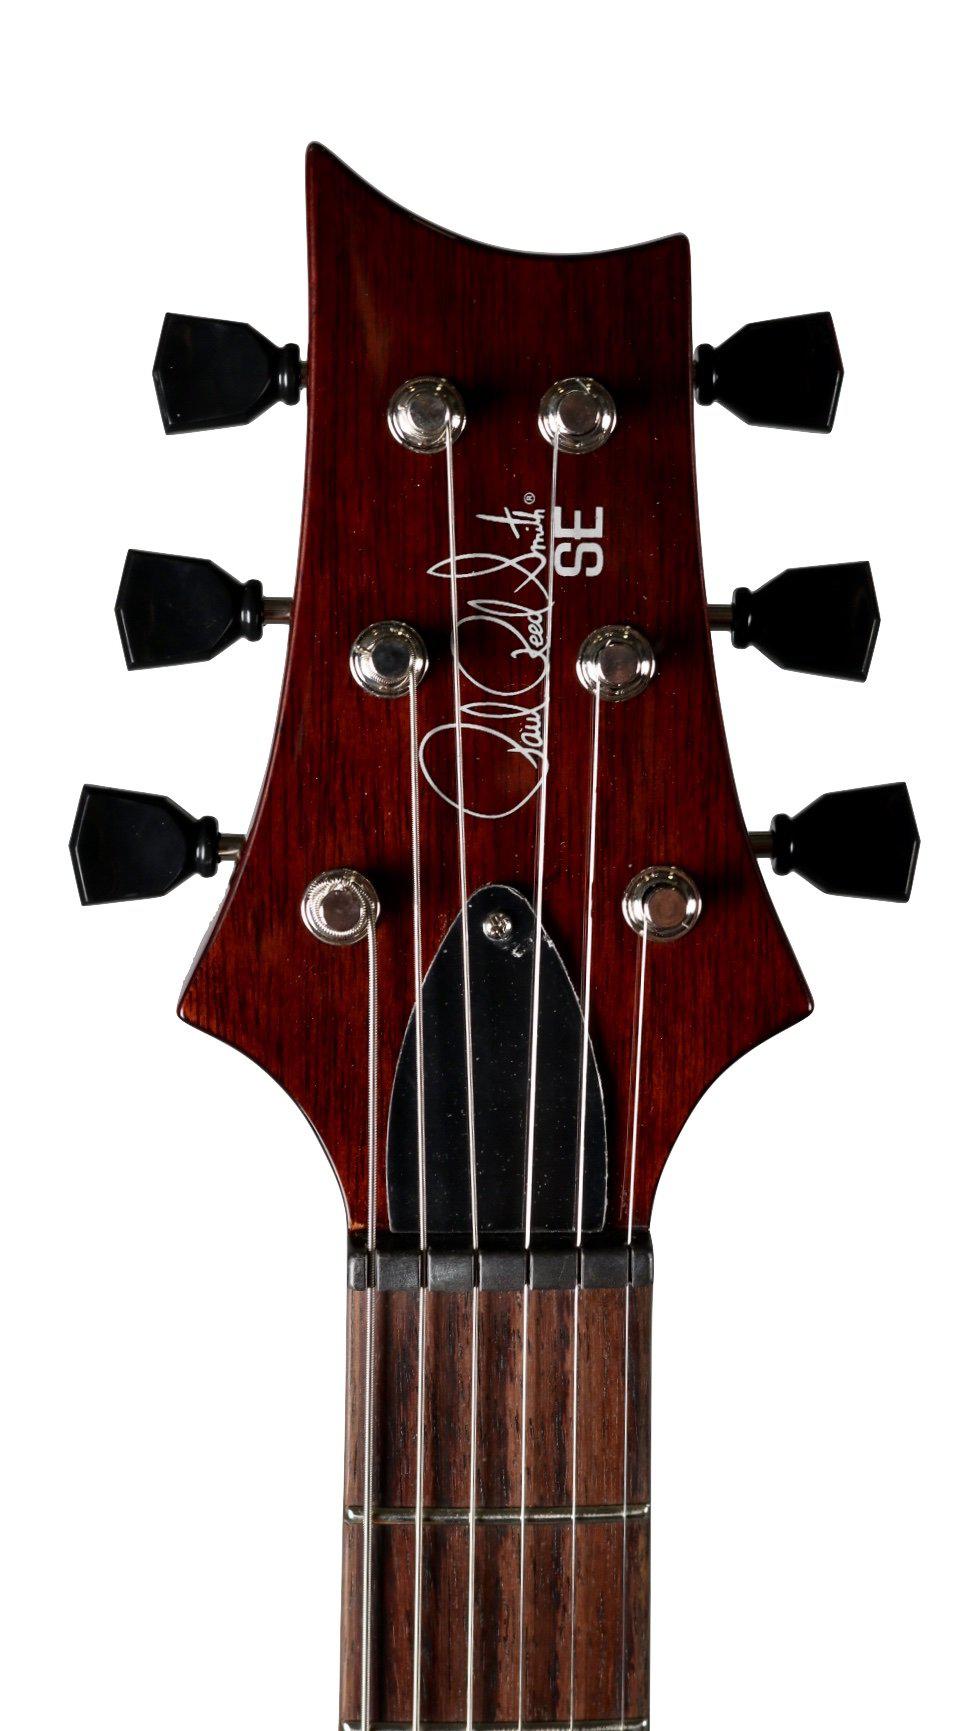 Paul Reed Smith(PRS) SE Paul's Guitar難あり